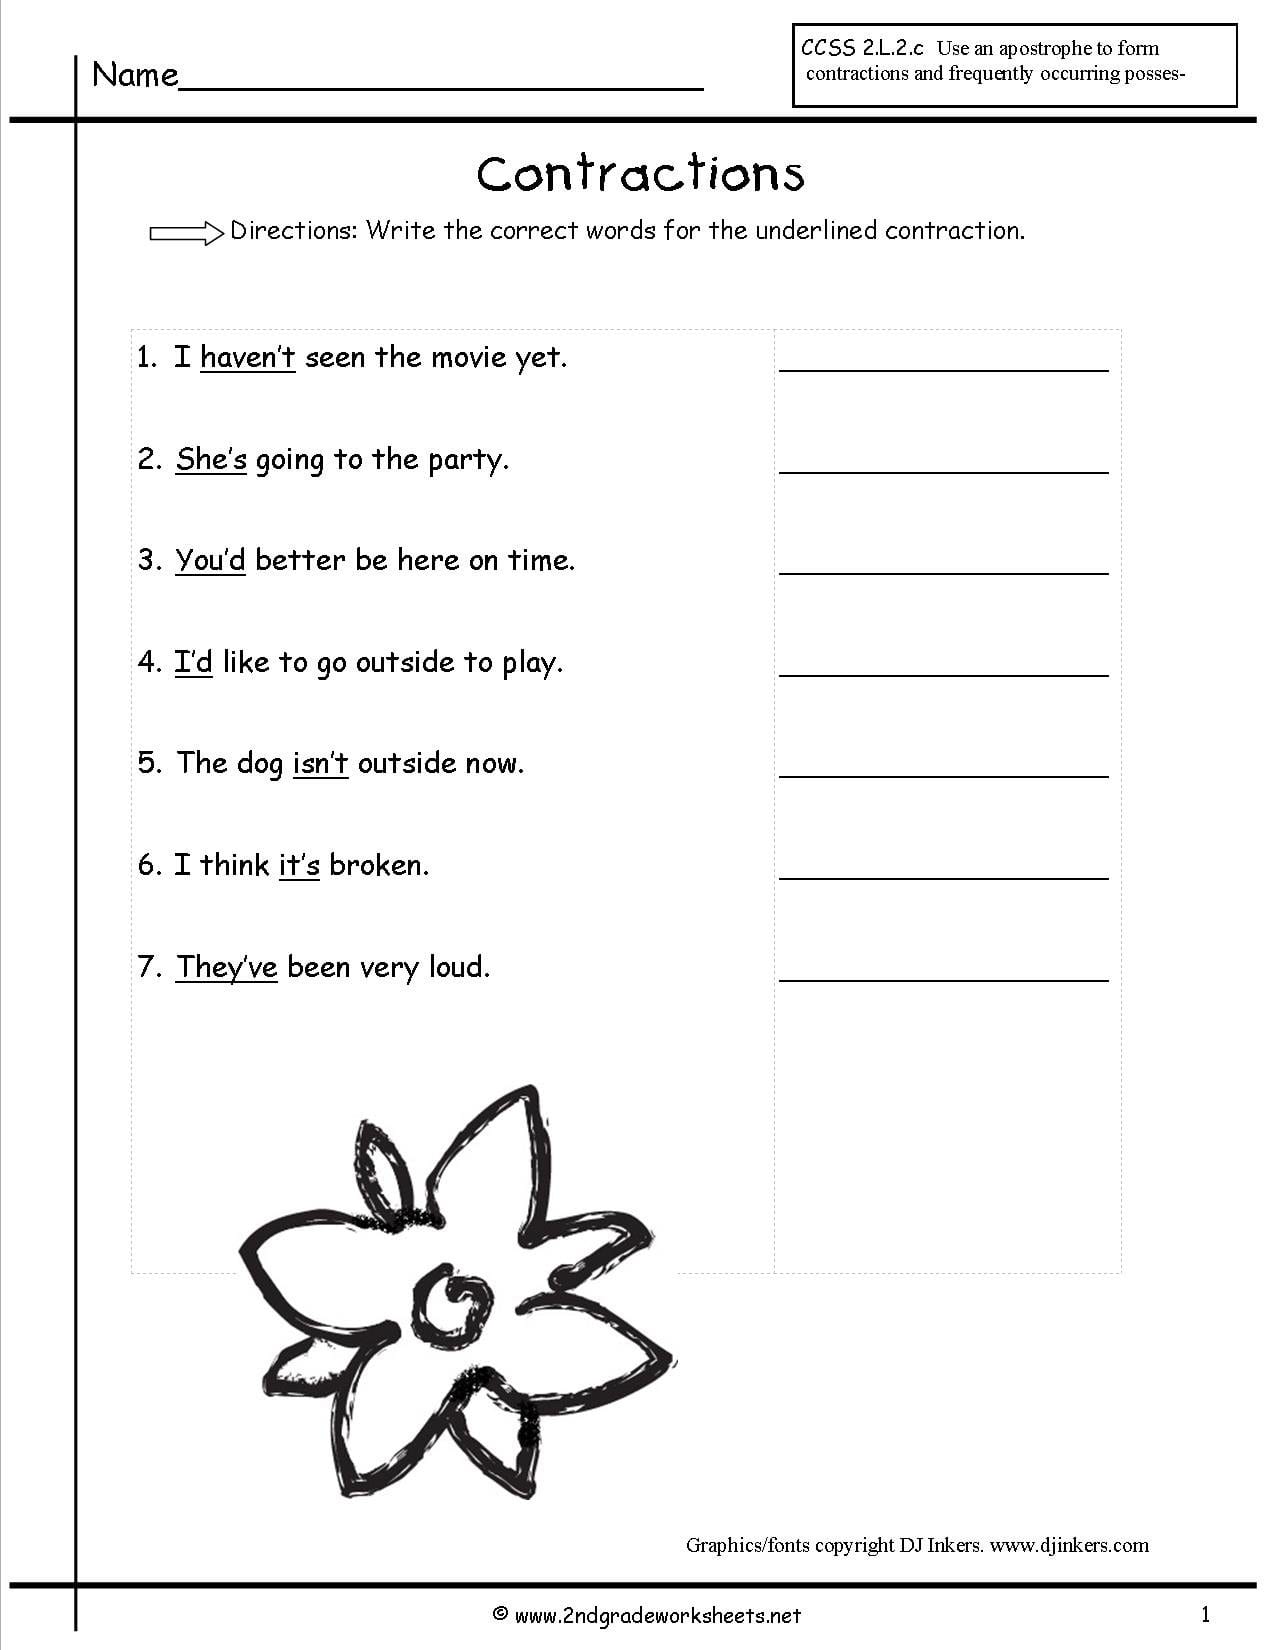 Free Contractions Worksheets And Printouts Pertaining To Free Contraction Worksheets